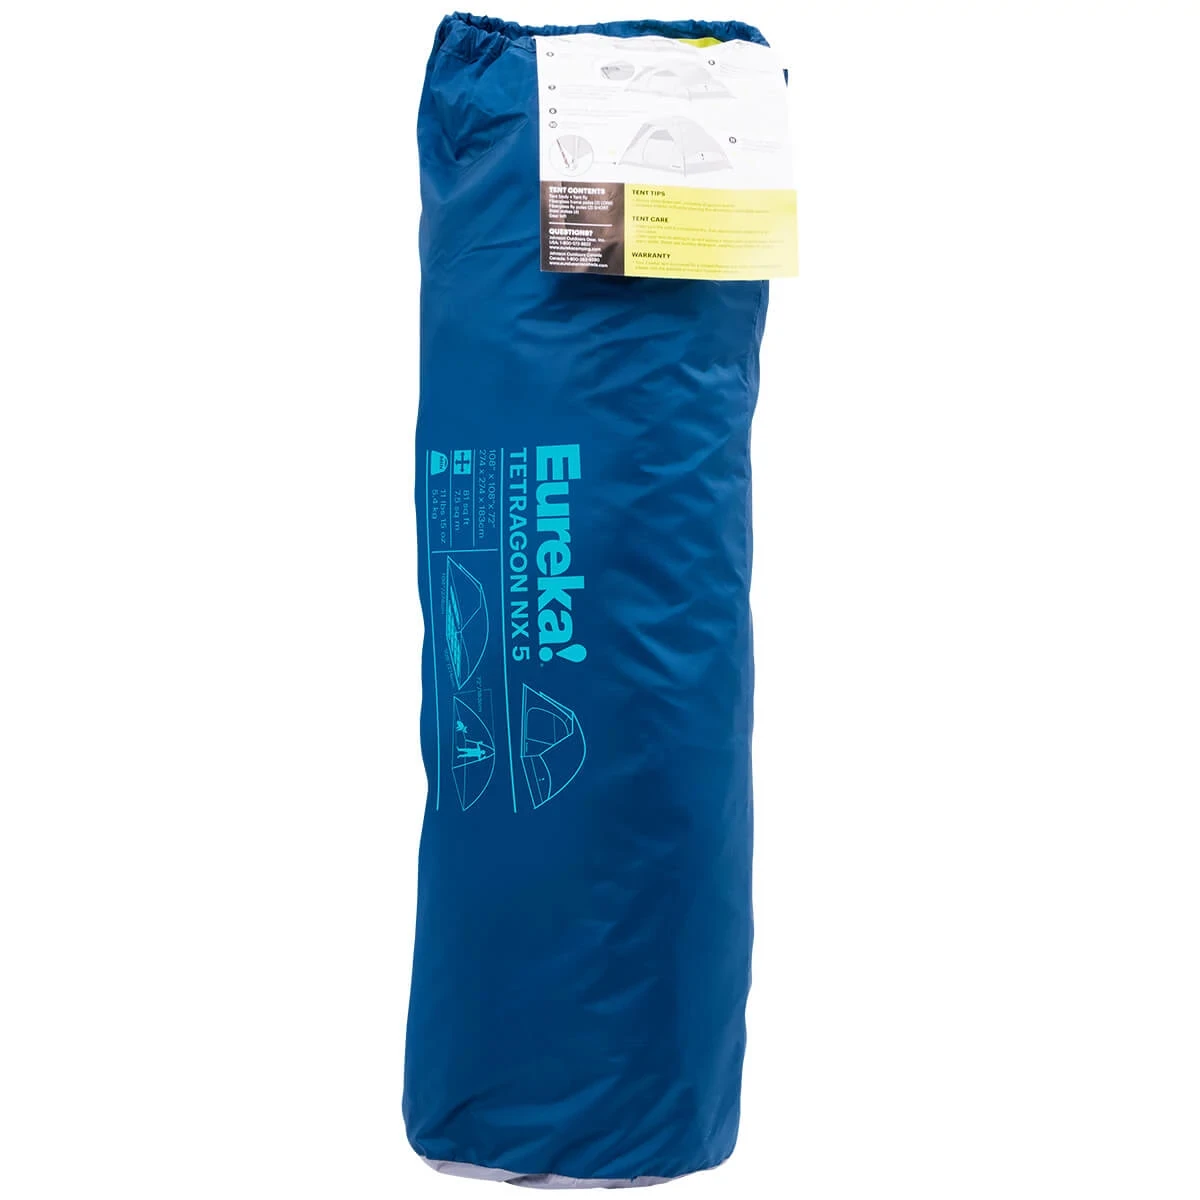 Packed Tetragon NX 5 tent in carry bag showing sewn in setup instructions